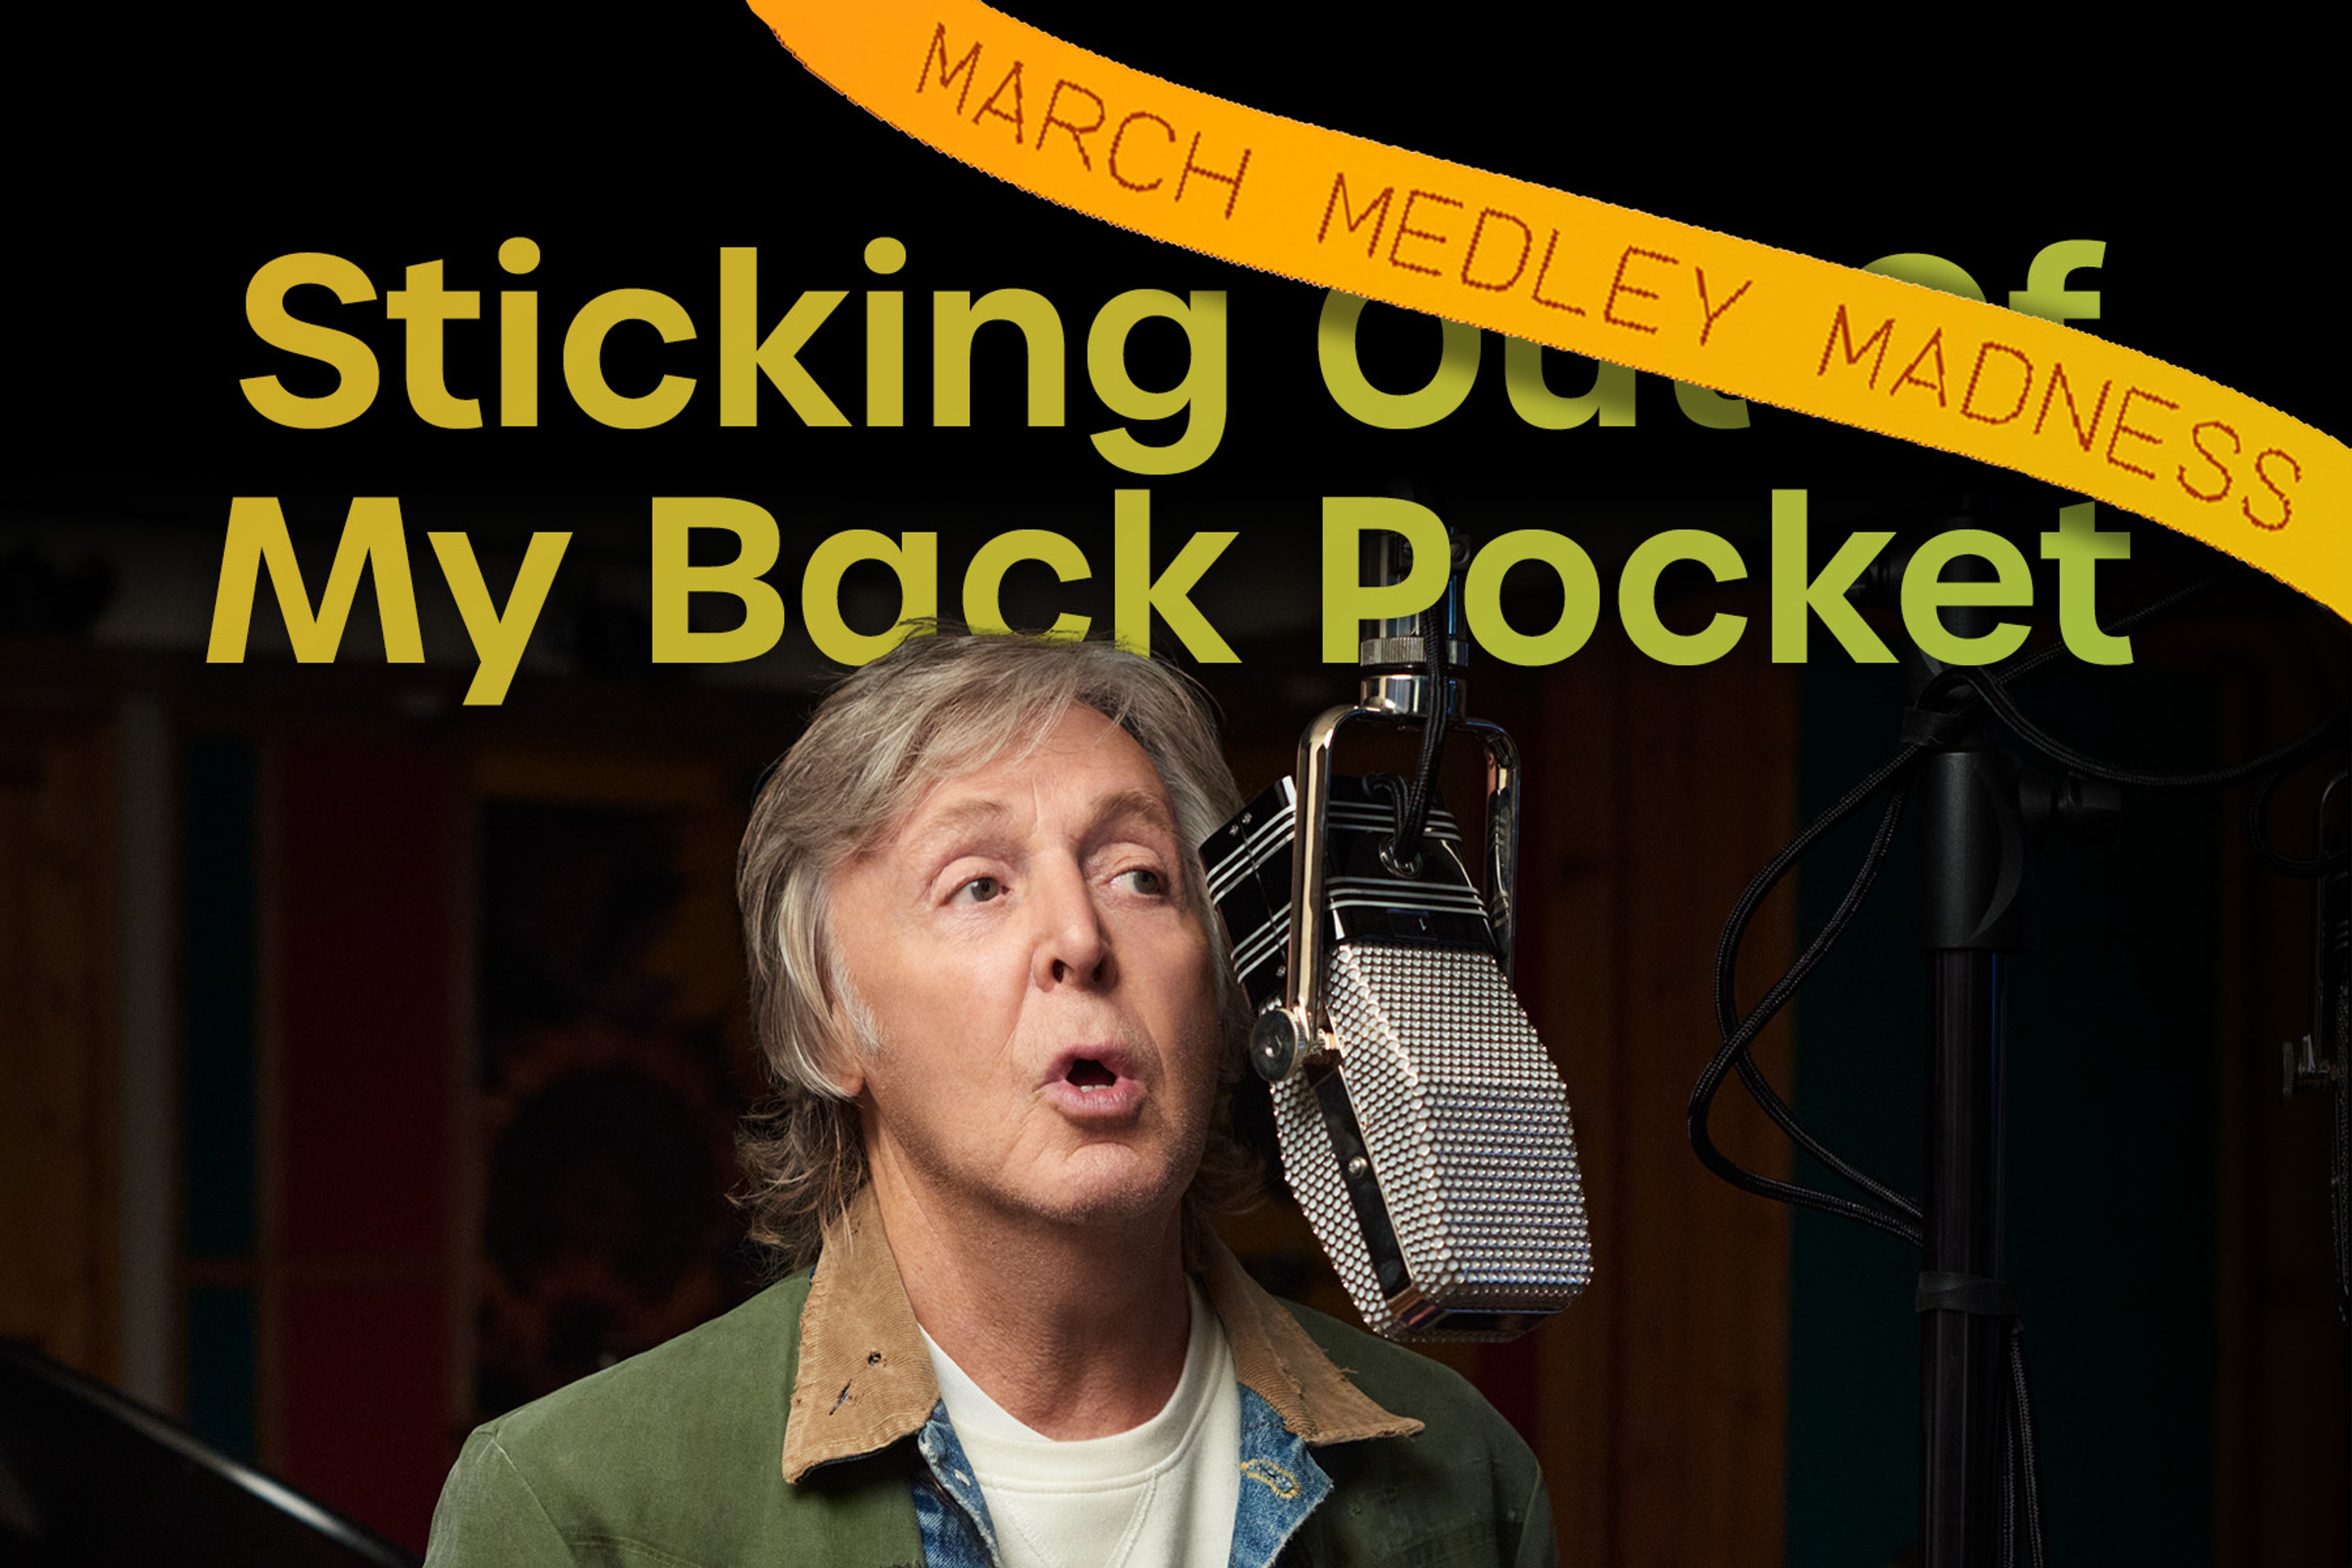 Playlist cover featuring a photo of Paul recording McCartney III at the microphone stand. Text overlayed for 'Sticking Out of My Back Pocket' March Medley Madness